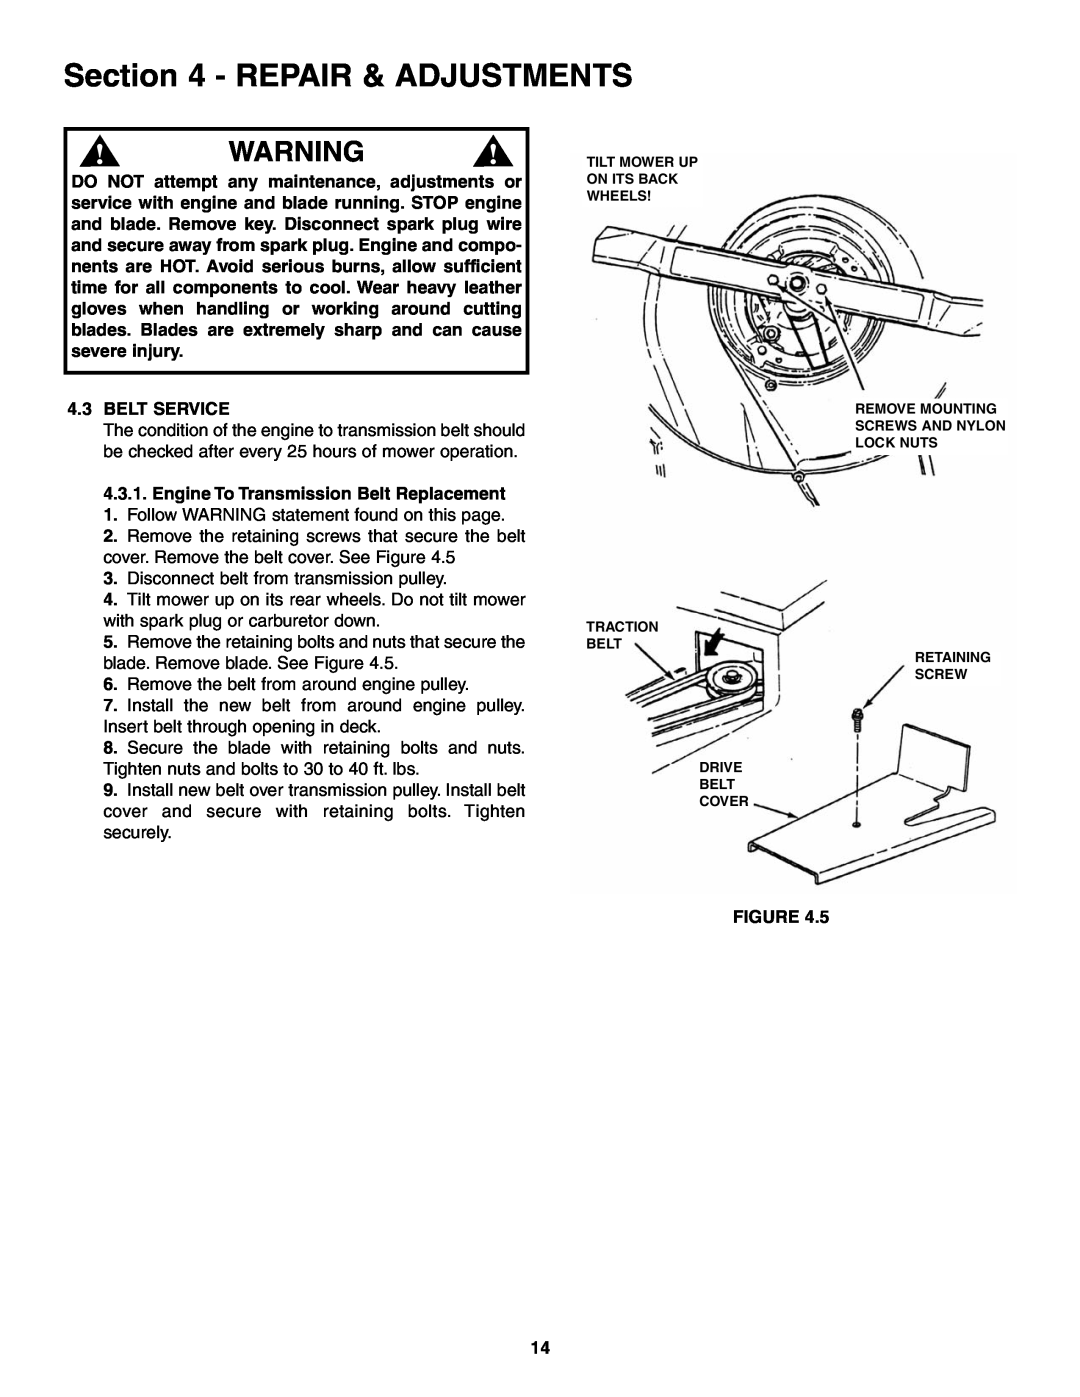 Snapper ELP216753BDV specifications Repair & Adjustments, Disconnect belt from transmission pulley 